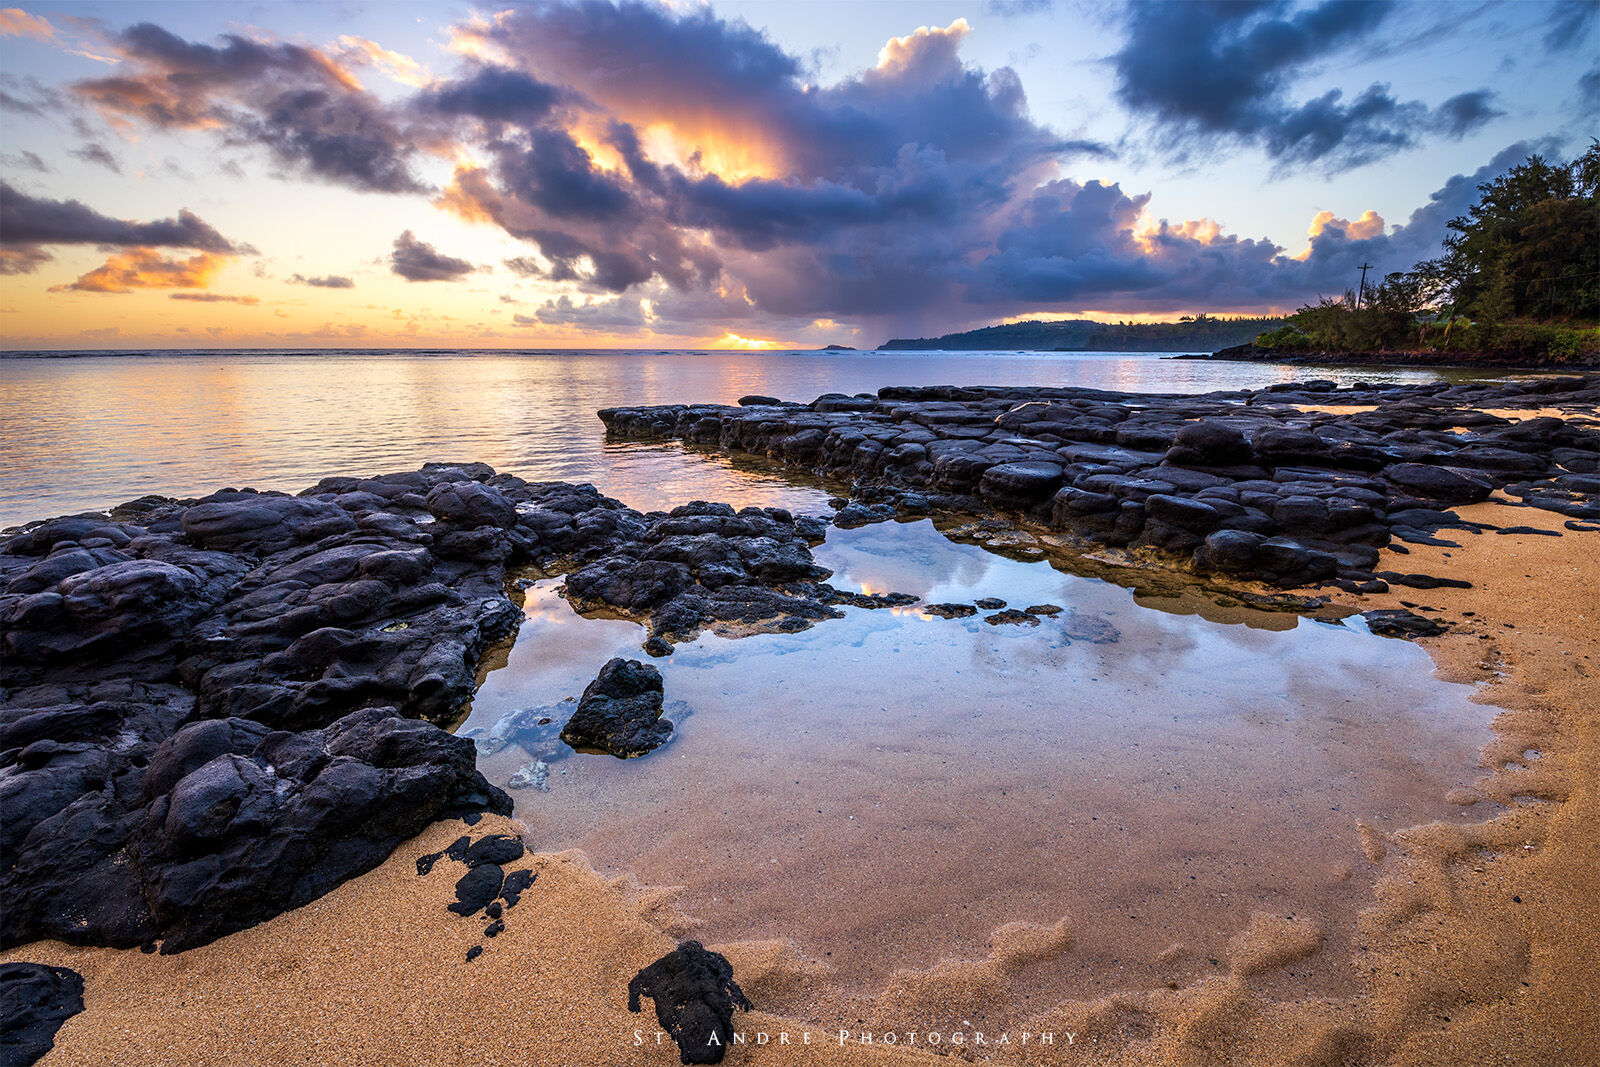 A tidal pool on the island of Hawaii at sunrise with the clouds reflecting in the still tidal pool waters. There were a few little...